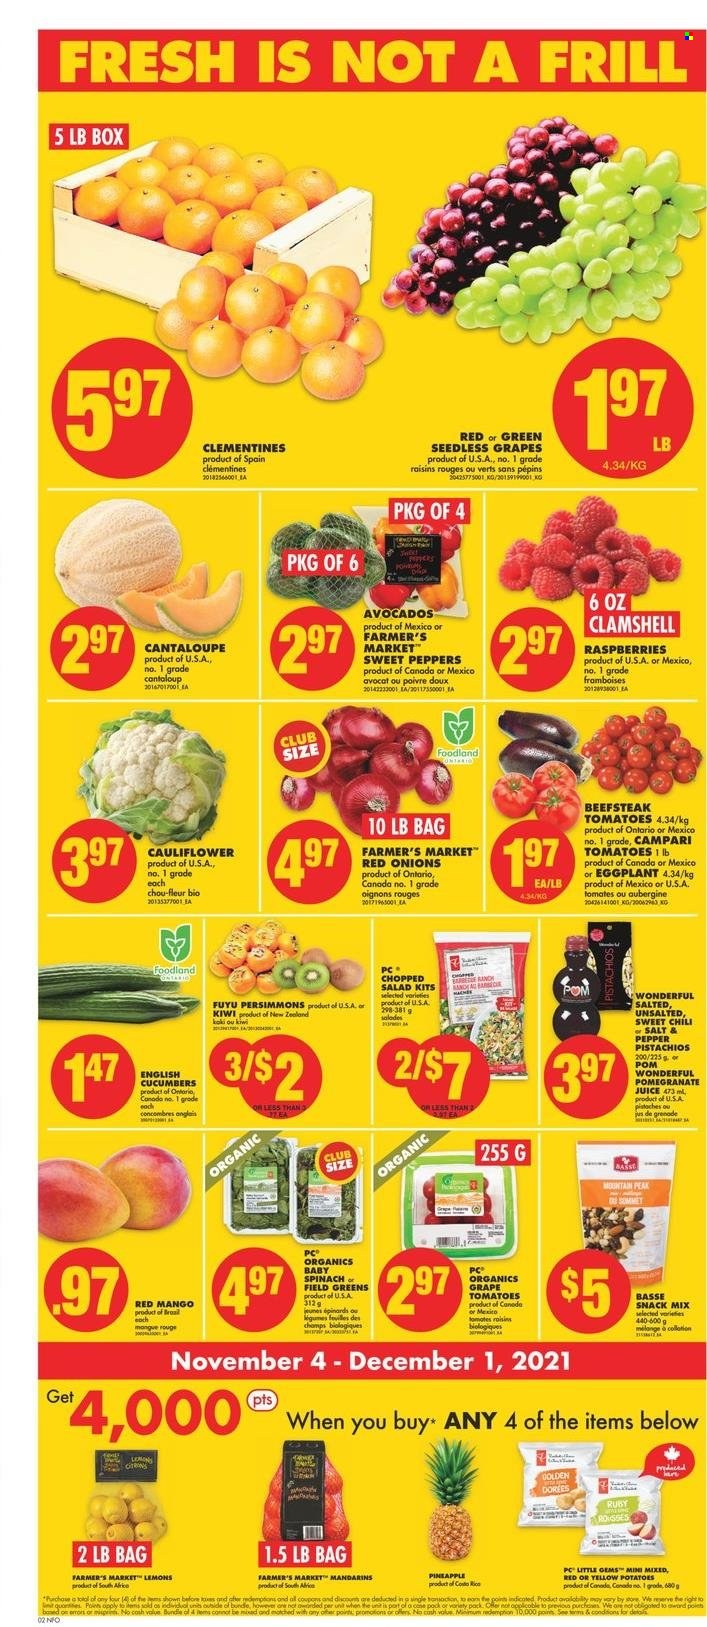 thumbnail - No Frills Flyer - November 04, 2021 - November 10, 2021 - Sales products - cantaloupe, cauliflower, cucumber, red onions, spinach, sweet peppers, tomatoes, potatoes, onion, salad, peppers, eggplant, chopped salad, avocado, clementines, mandarines, seedless grapes, pineapple, persimmons, pomegranate, lemons, Ola, snack, rice, dried fruit, pistachios, juice, tea, kiwi, raisins. Page 3.